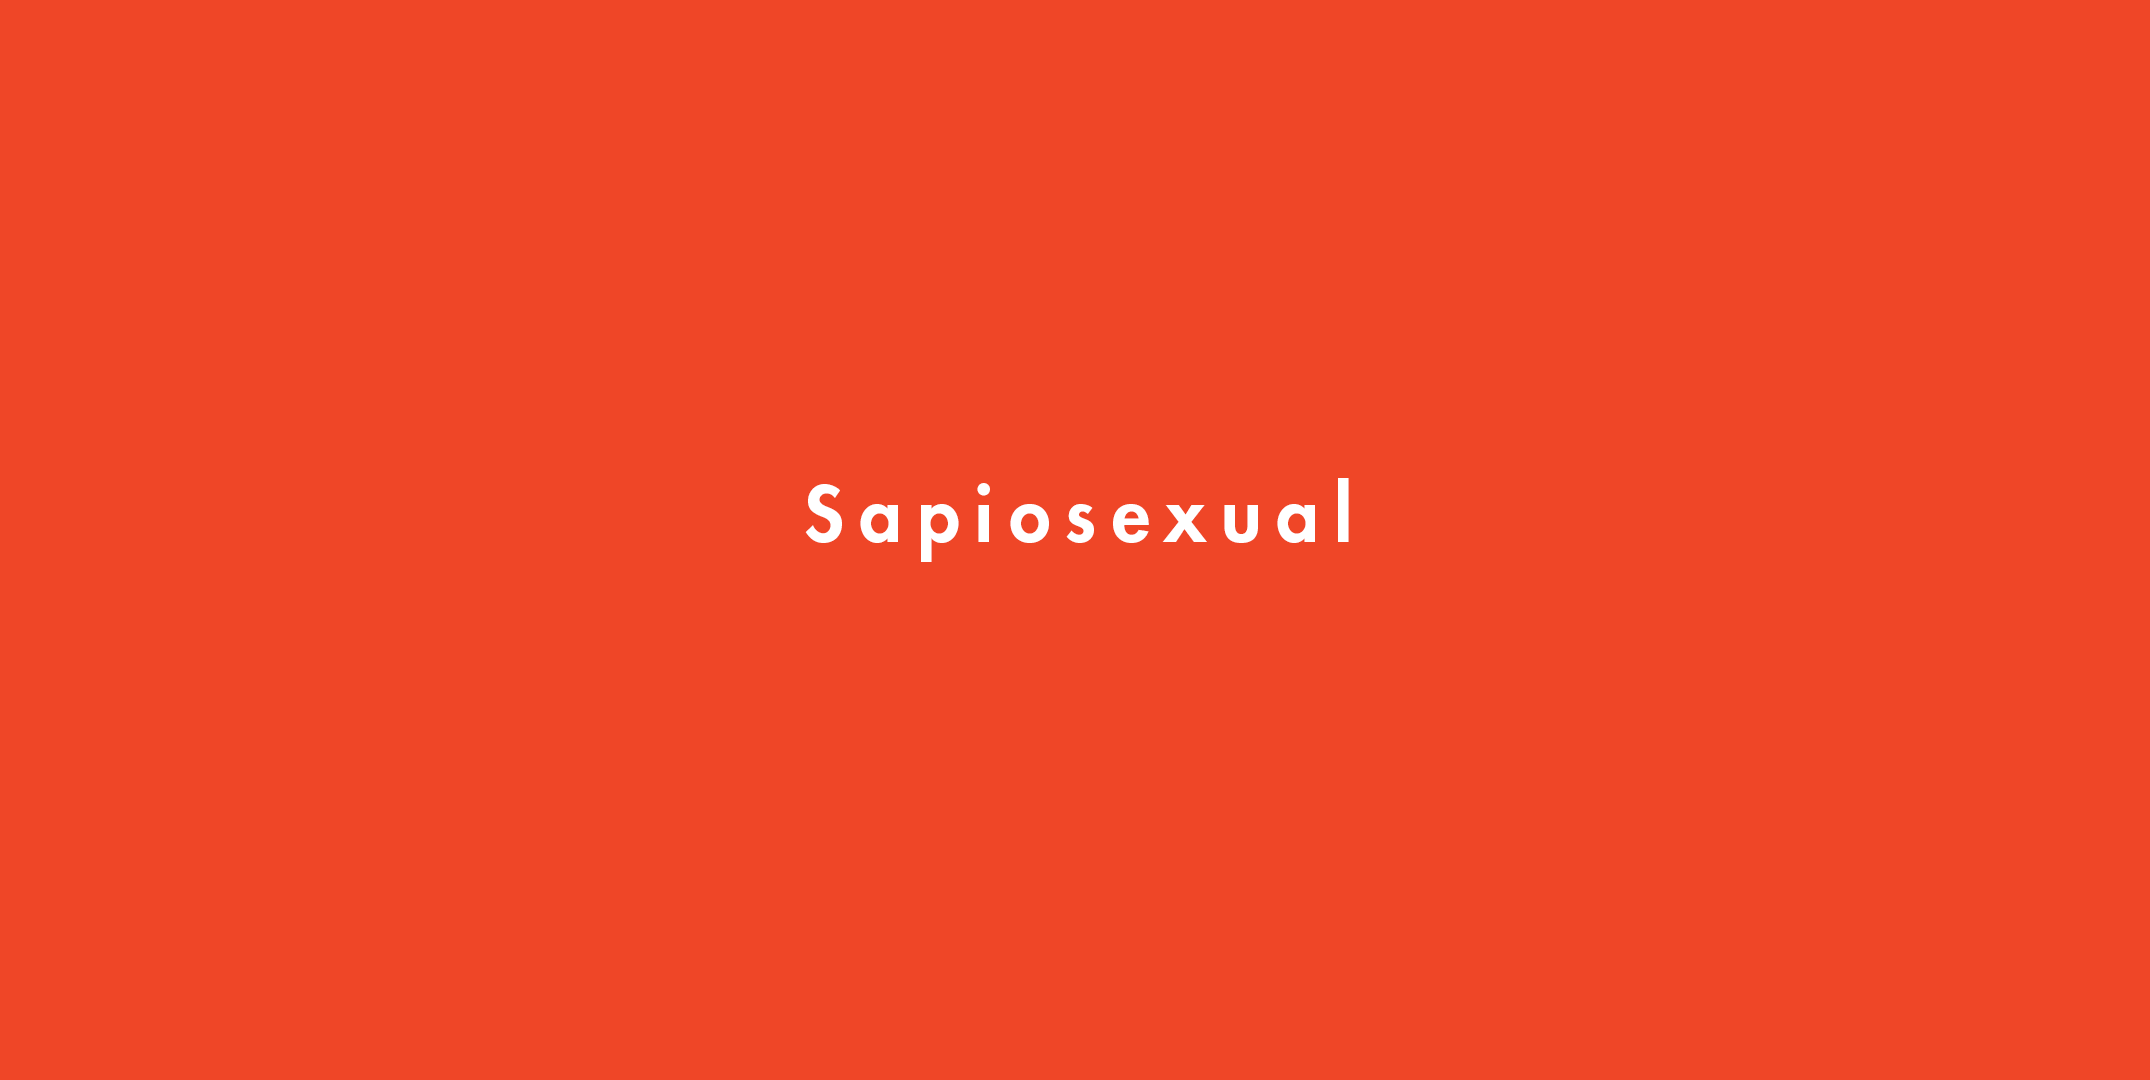 Sapiosexual Meaning